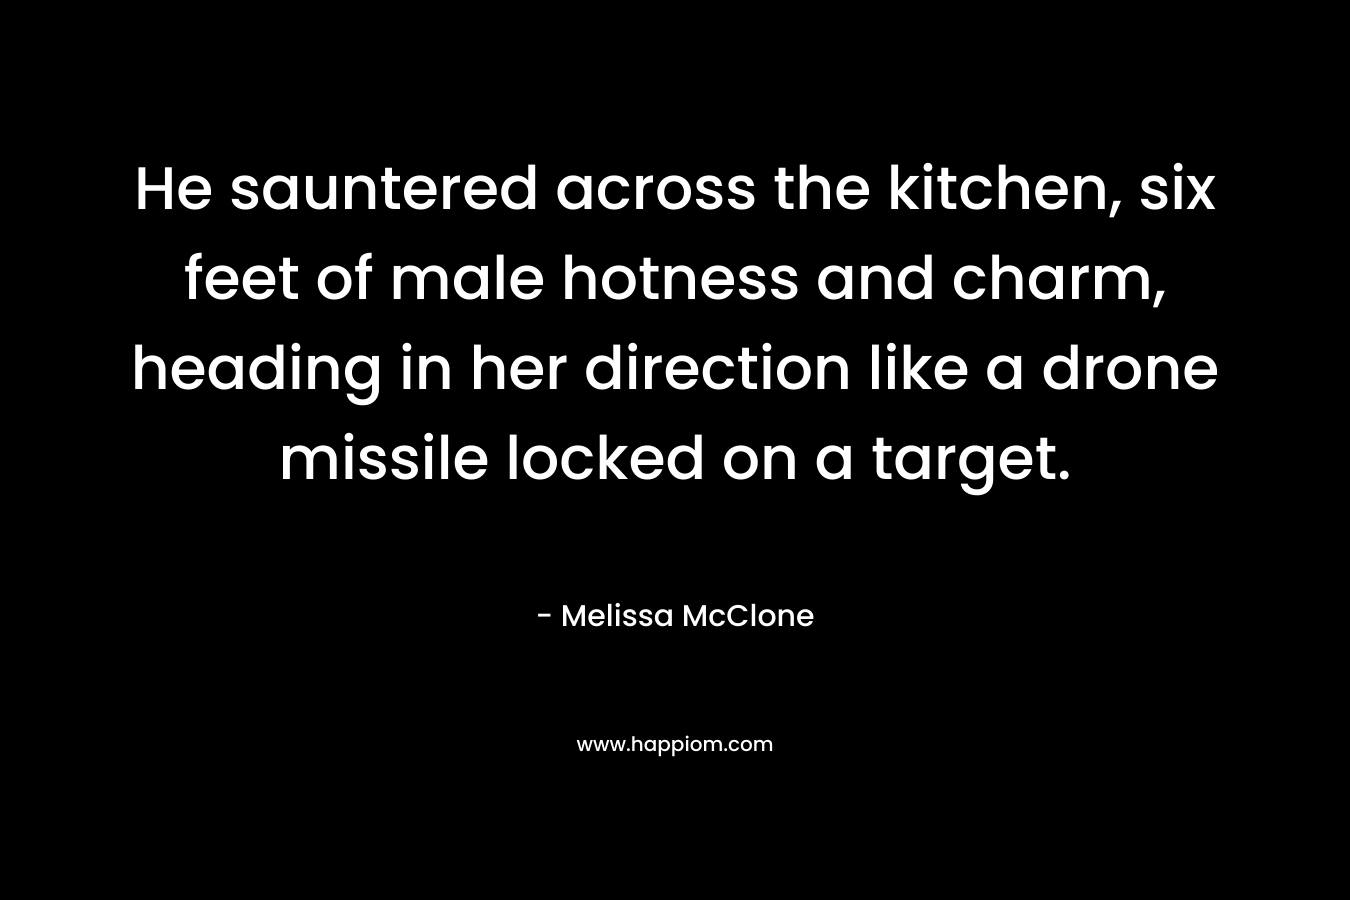 He sauntered across the kitchen, six feet of male hotness and charm, heading in her direction like a drone missile locked on a target.